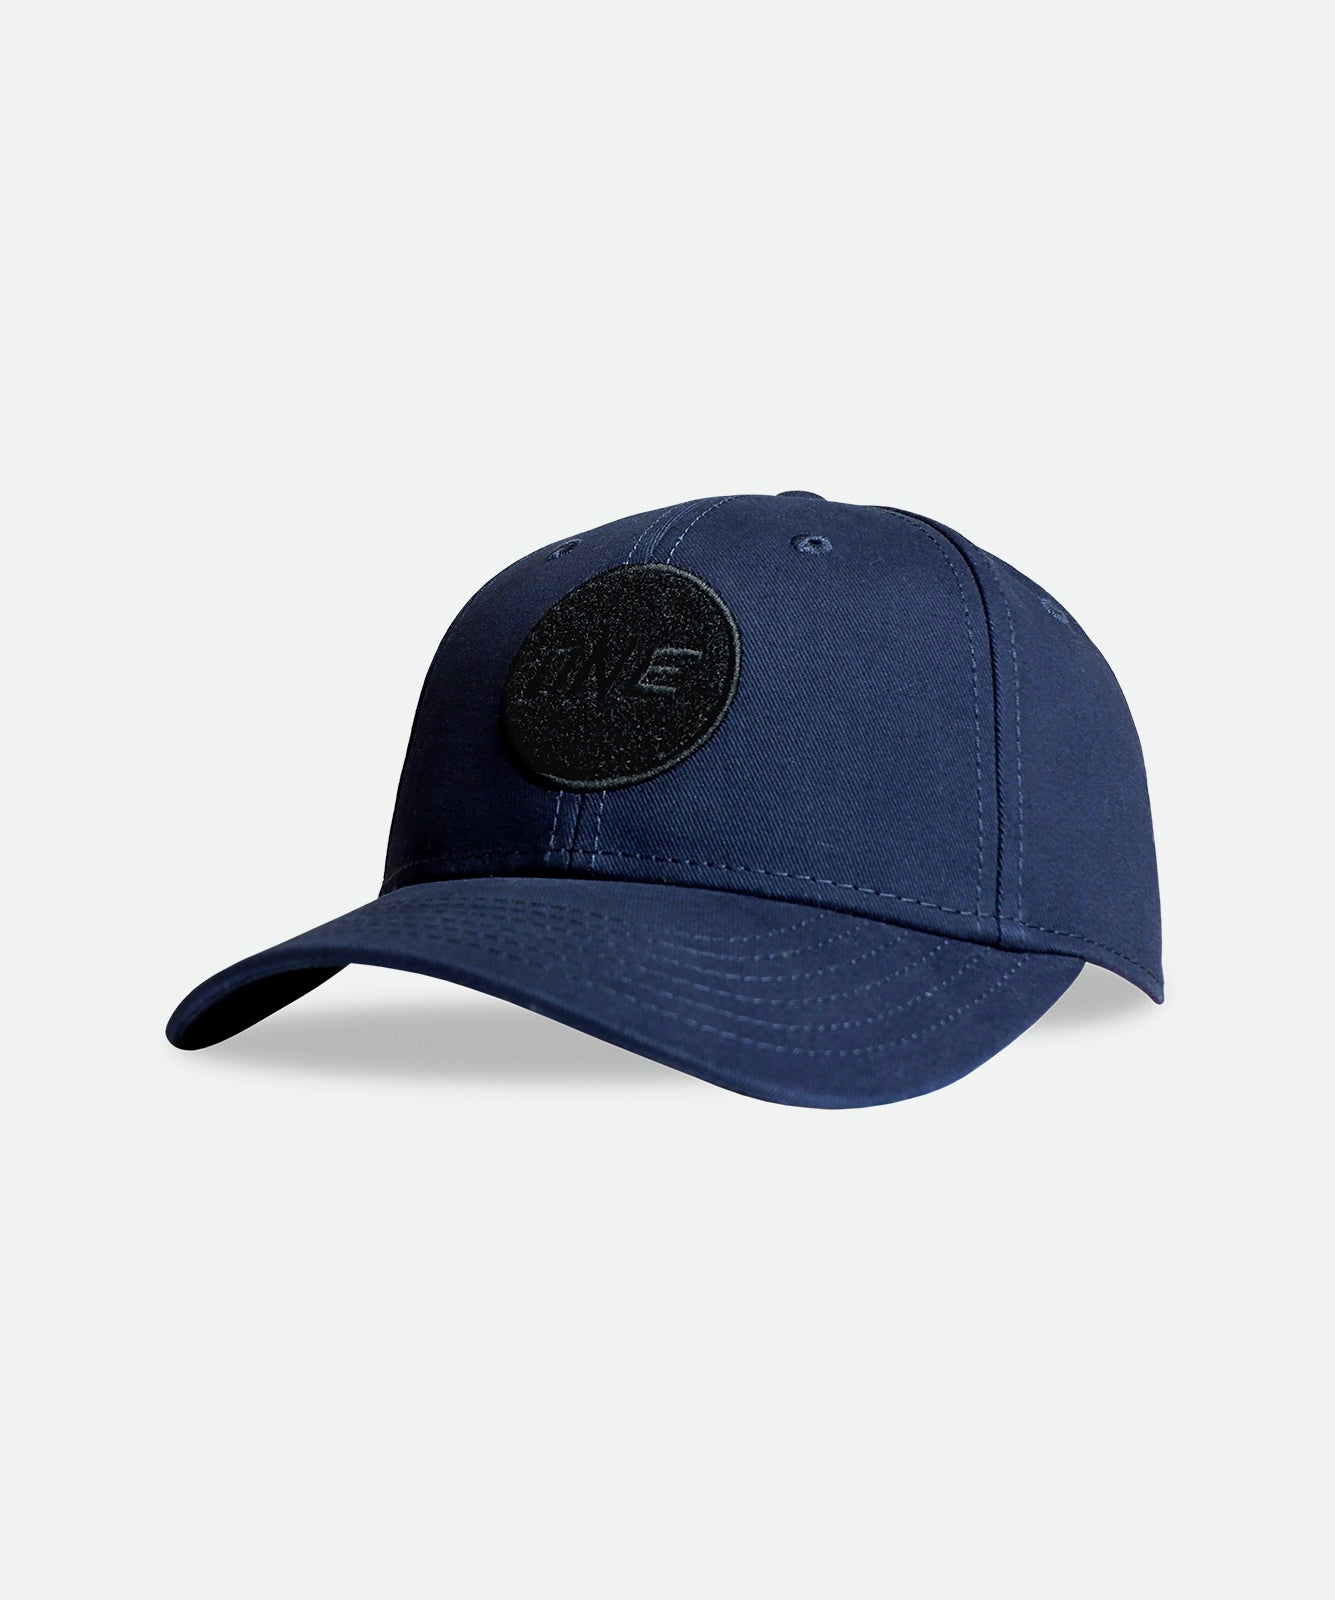 ONE Hero Cap (Navy) - ONE.SHOP Philippines | The Official Online Shop of ONE Championship